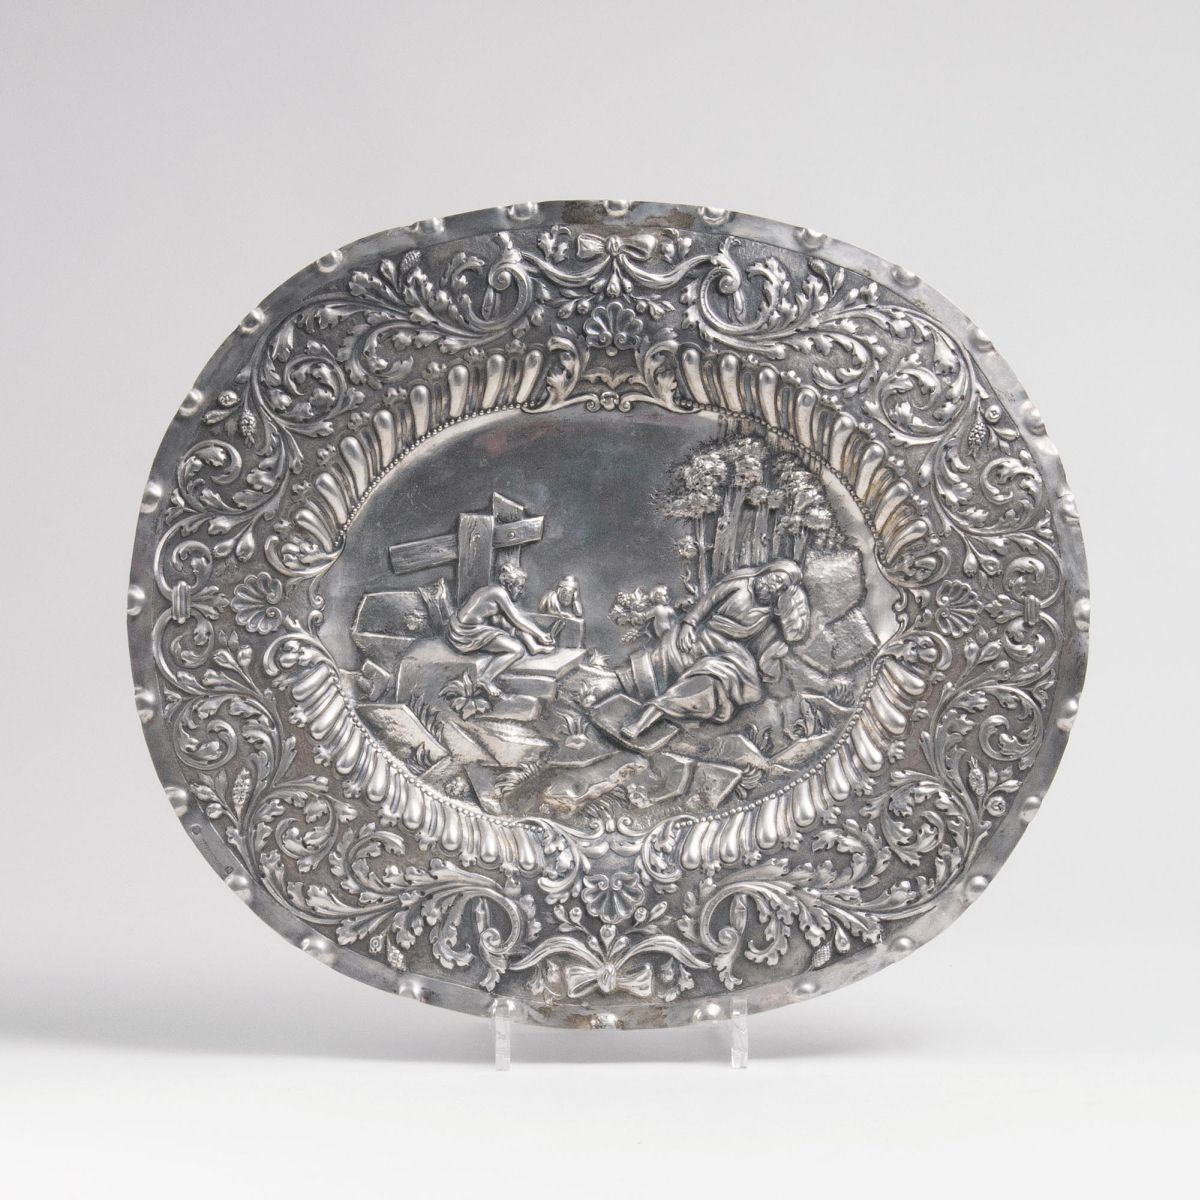 A Nuremberg Relief Plate with Figural Scenery